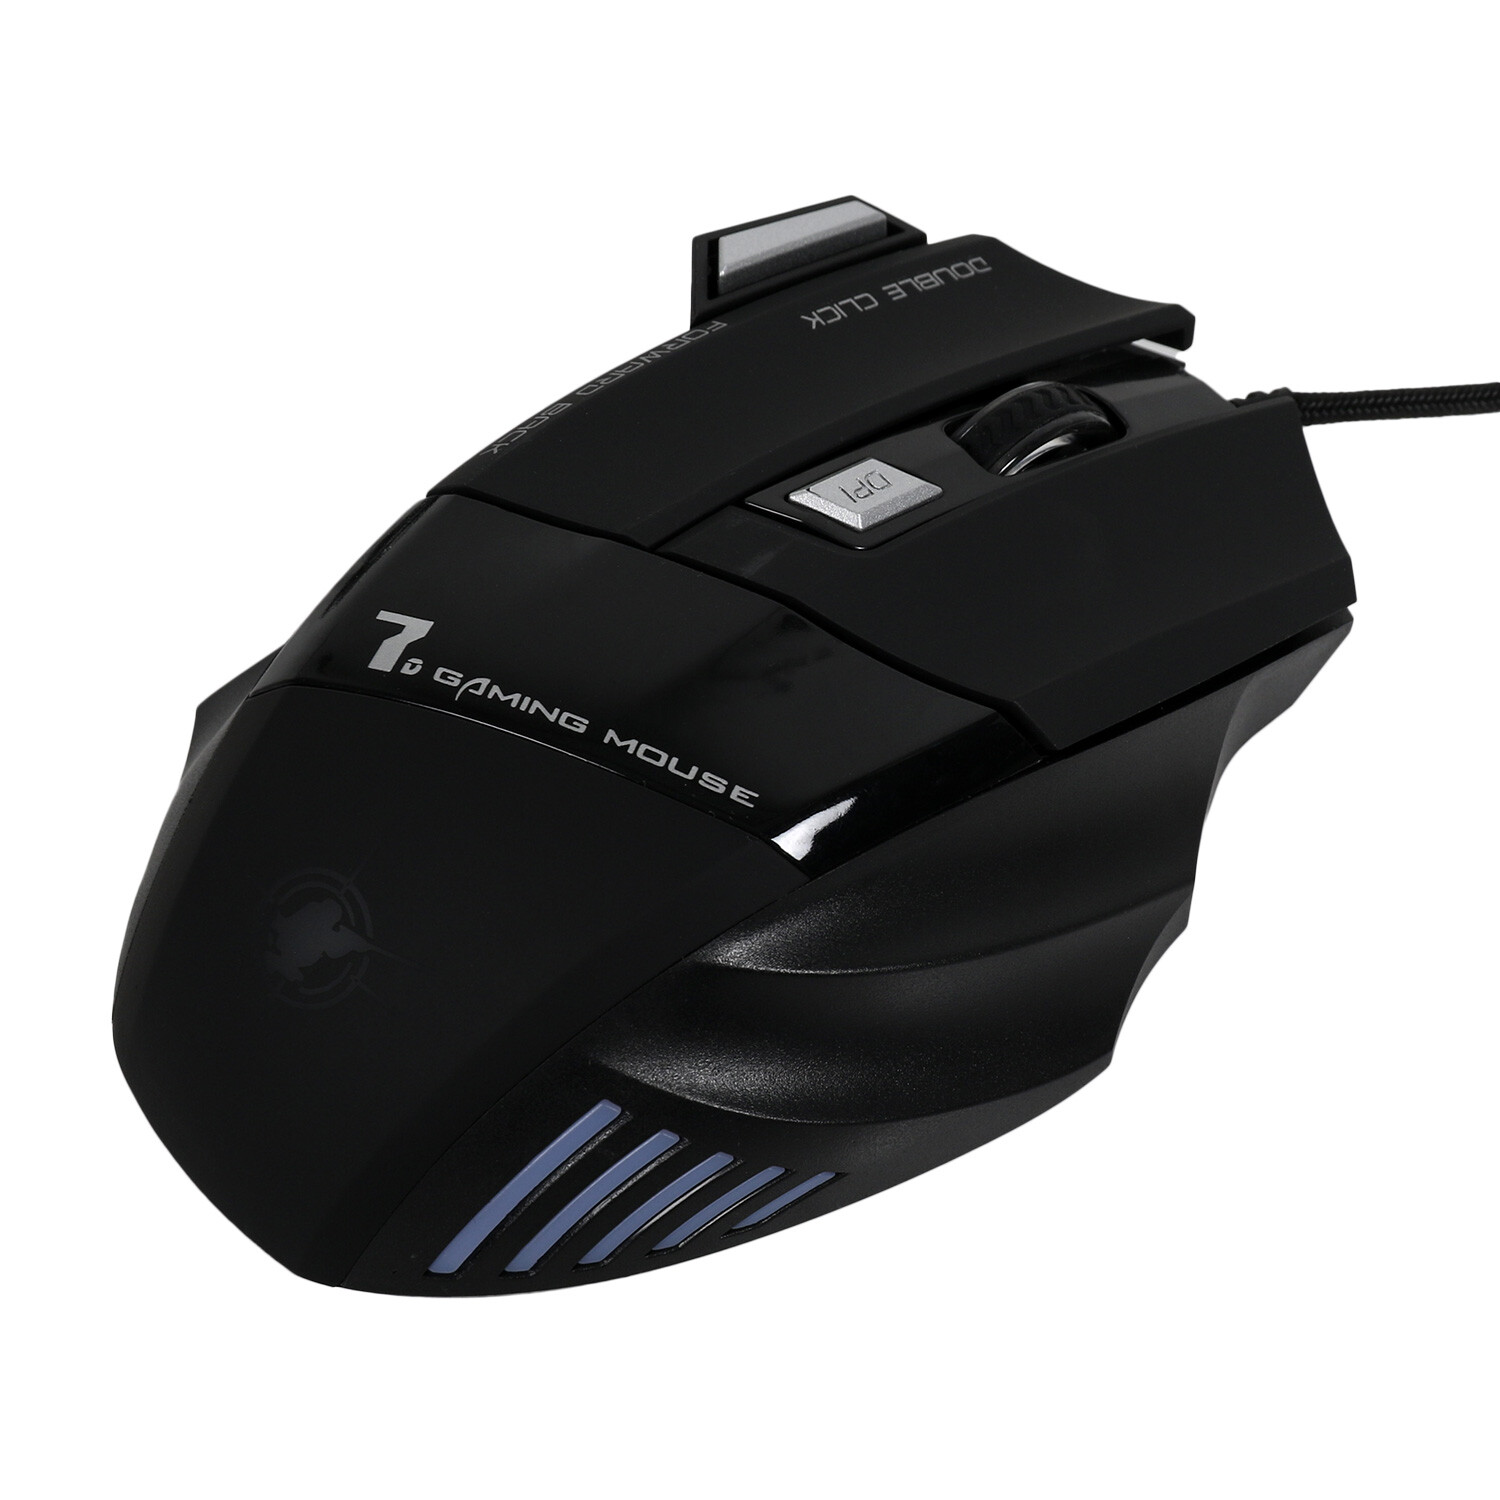 7D Gaming Mouse - Black Image 3